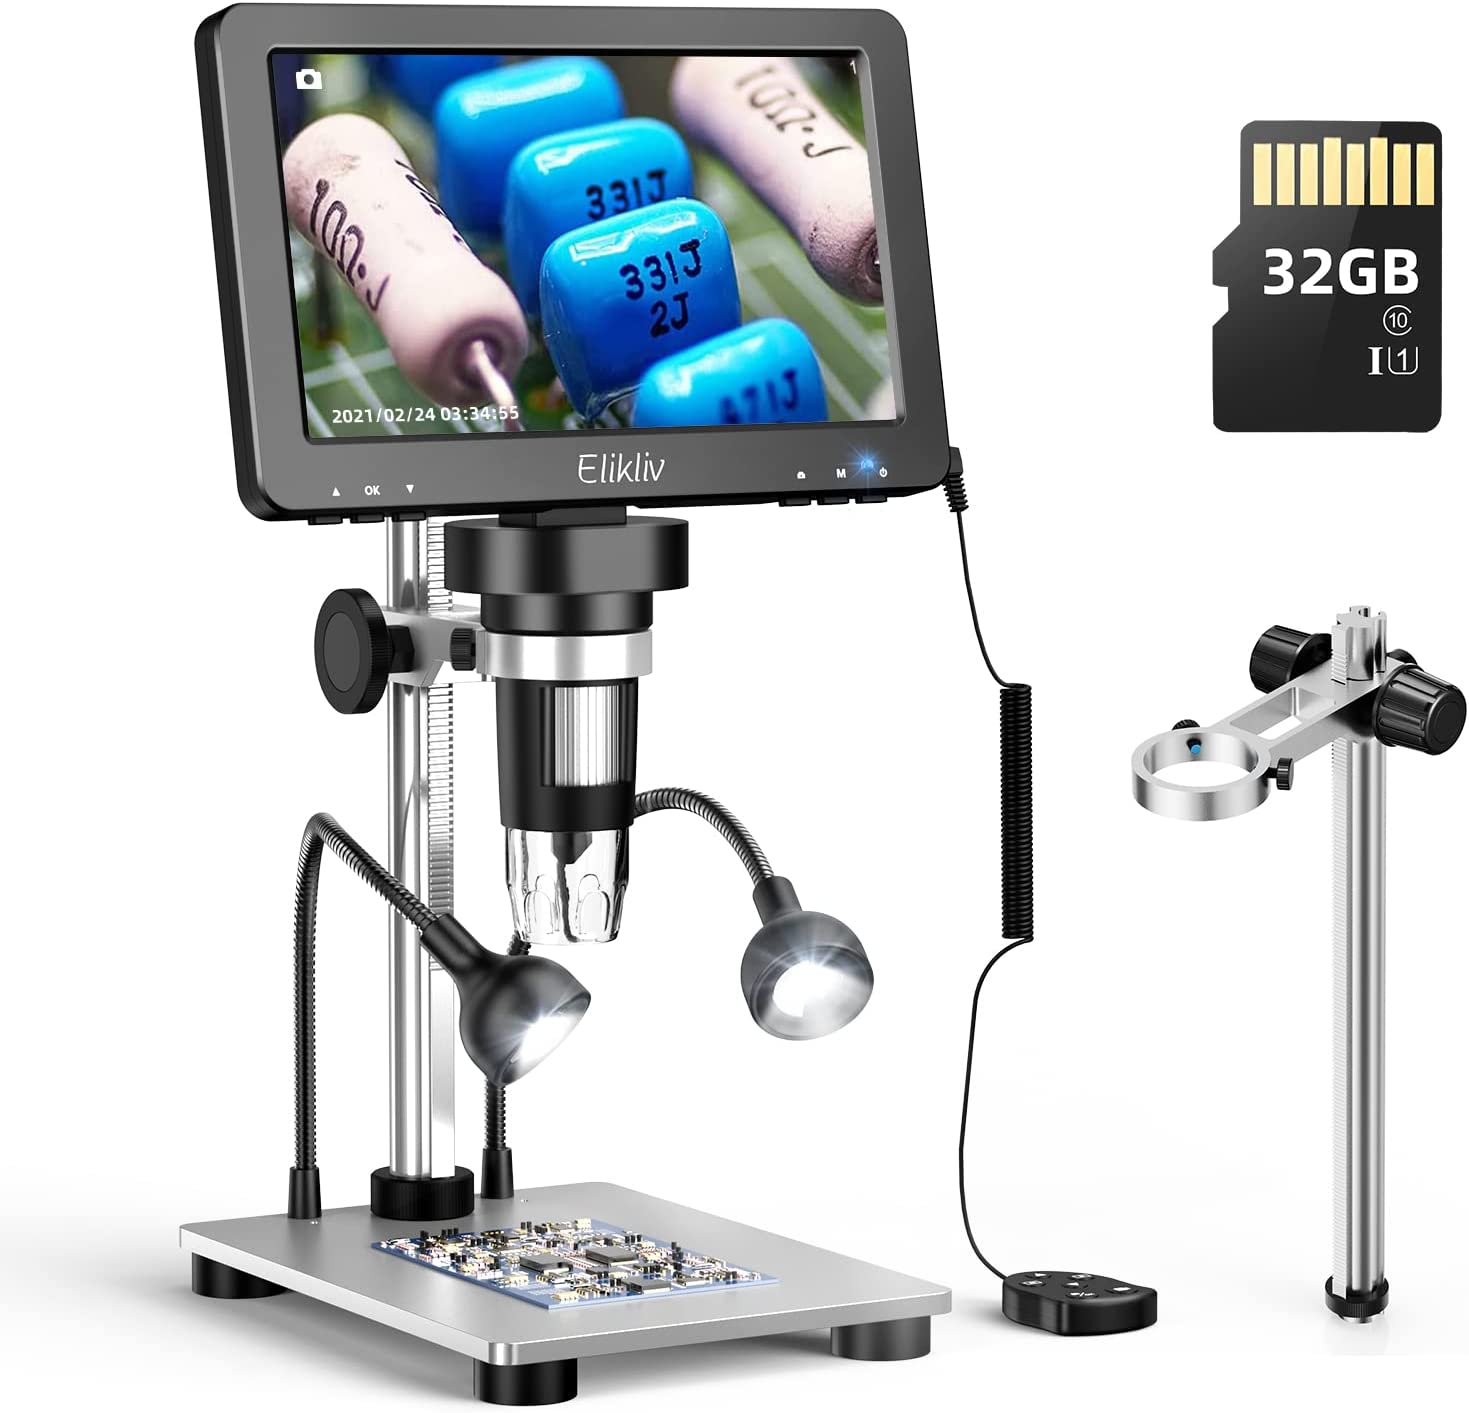 Elikliv EDM9 7” LCD Digital Microscope + 10″ Enhanced Bracket BR01, View Entire Coin, 1080P Coin Microscope with 12MP Camera Sensor, Wired Remote, 10 LED Lights